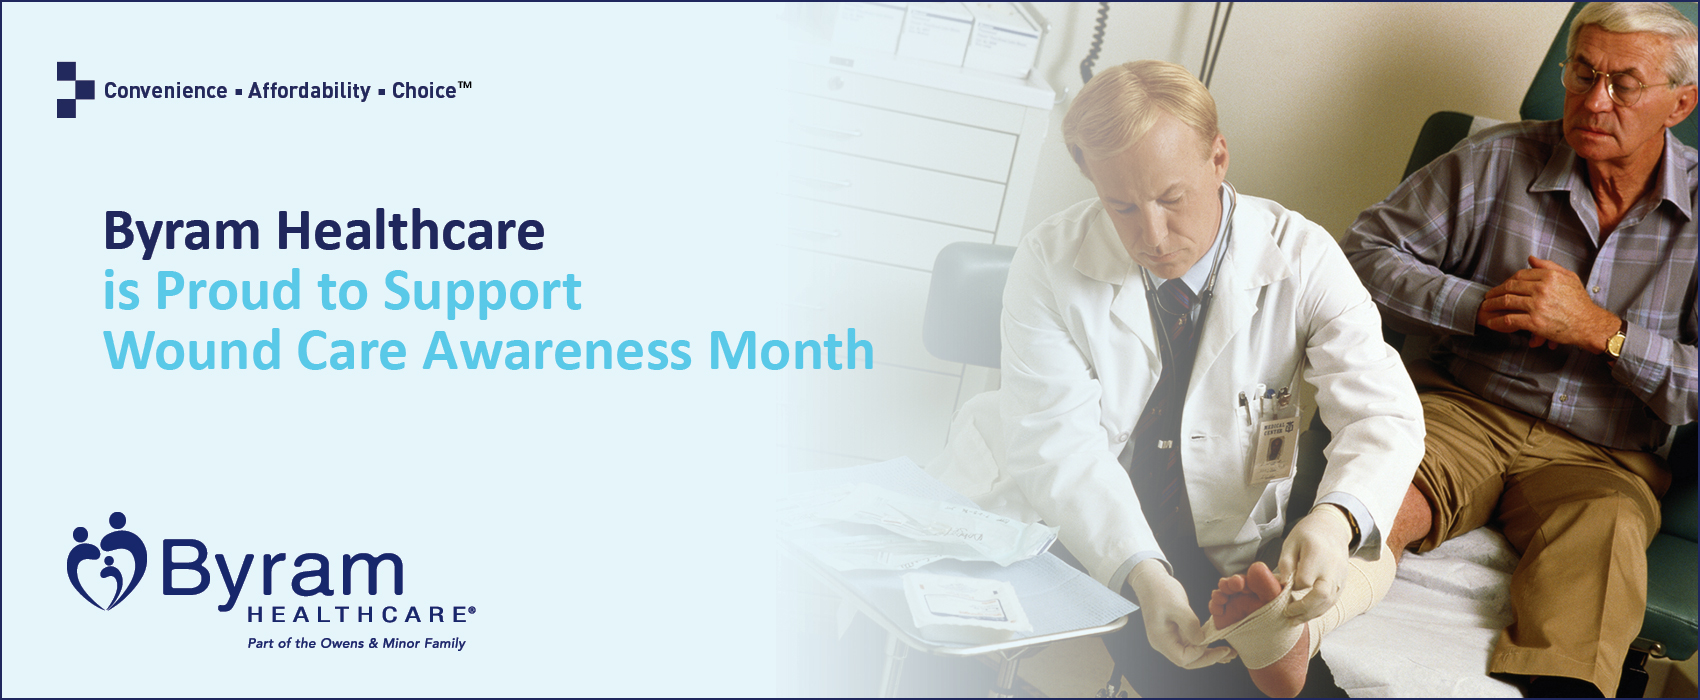 Wound Care Awareness Month